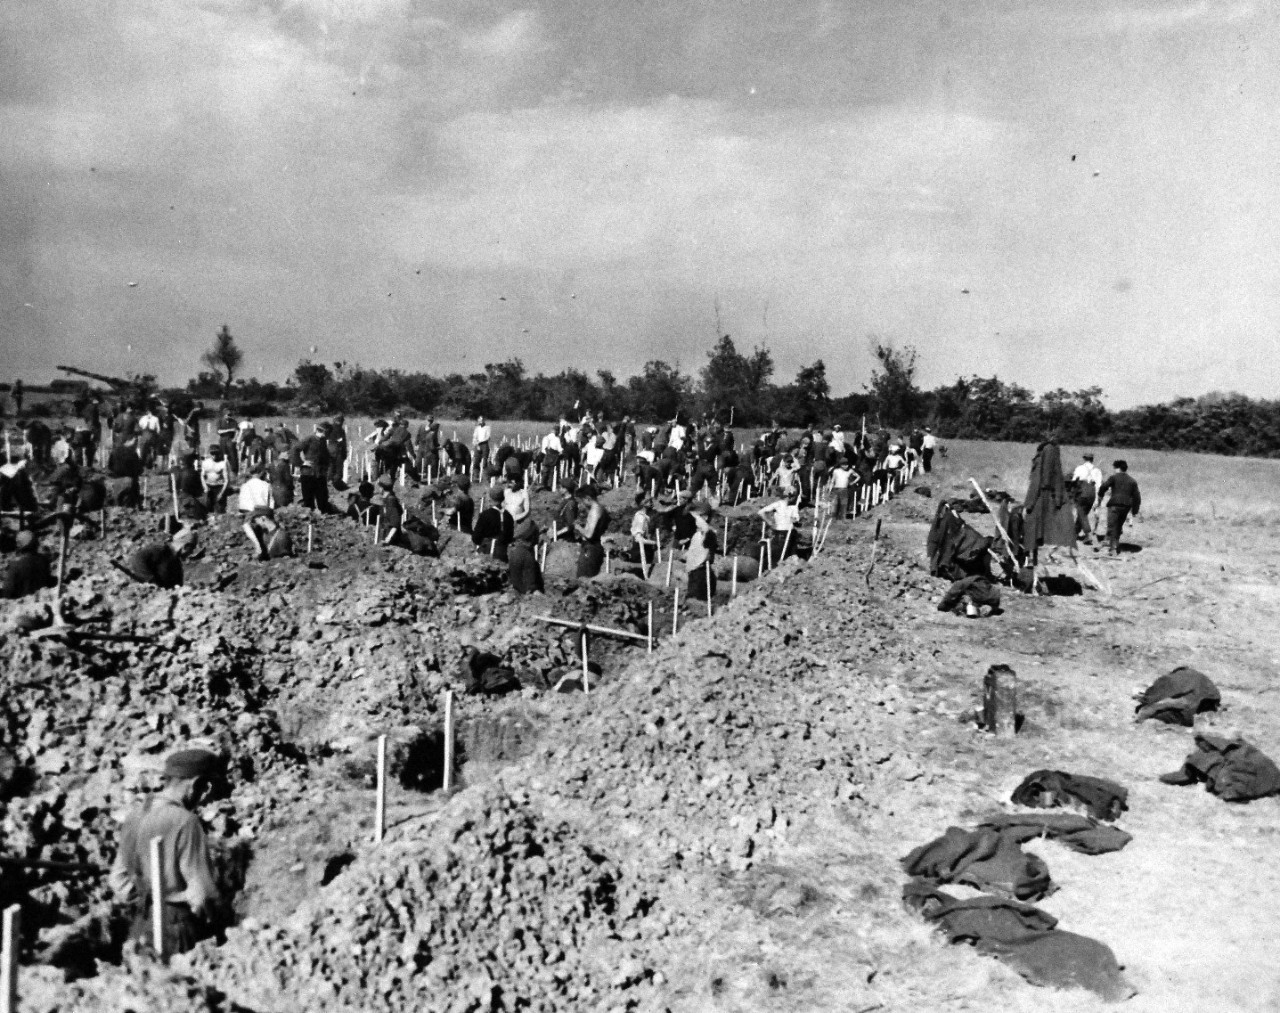 80-G-285229:  Normandy Invasion, German Prisoners, June 1944. German prisoners, captured during invasion of Normandy, France, digging graves overlooking Dog Red beach.   Photograph released November 7, 1944.  U.S. Navy photograph, now in the collections of the National Archives.  (2016/03/15).